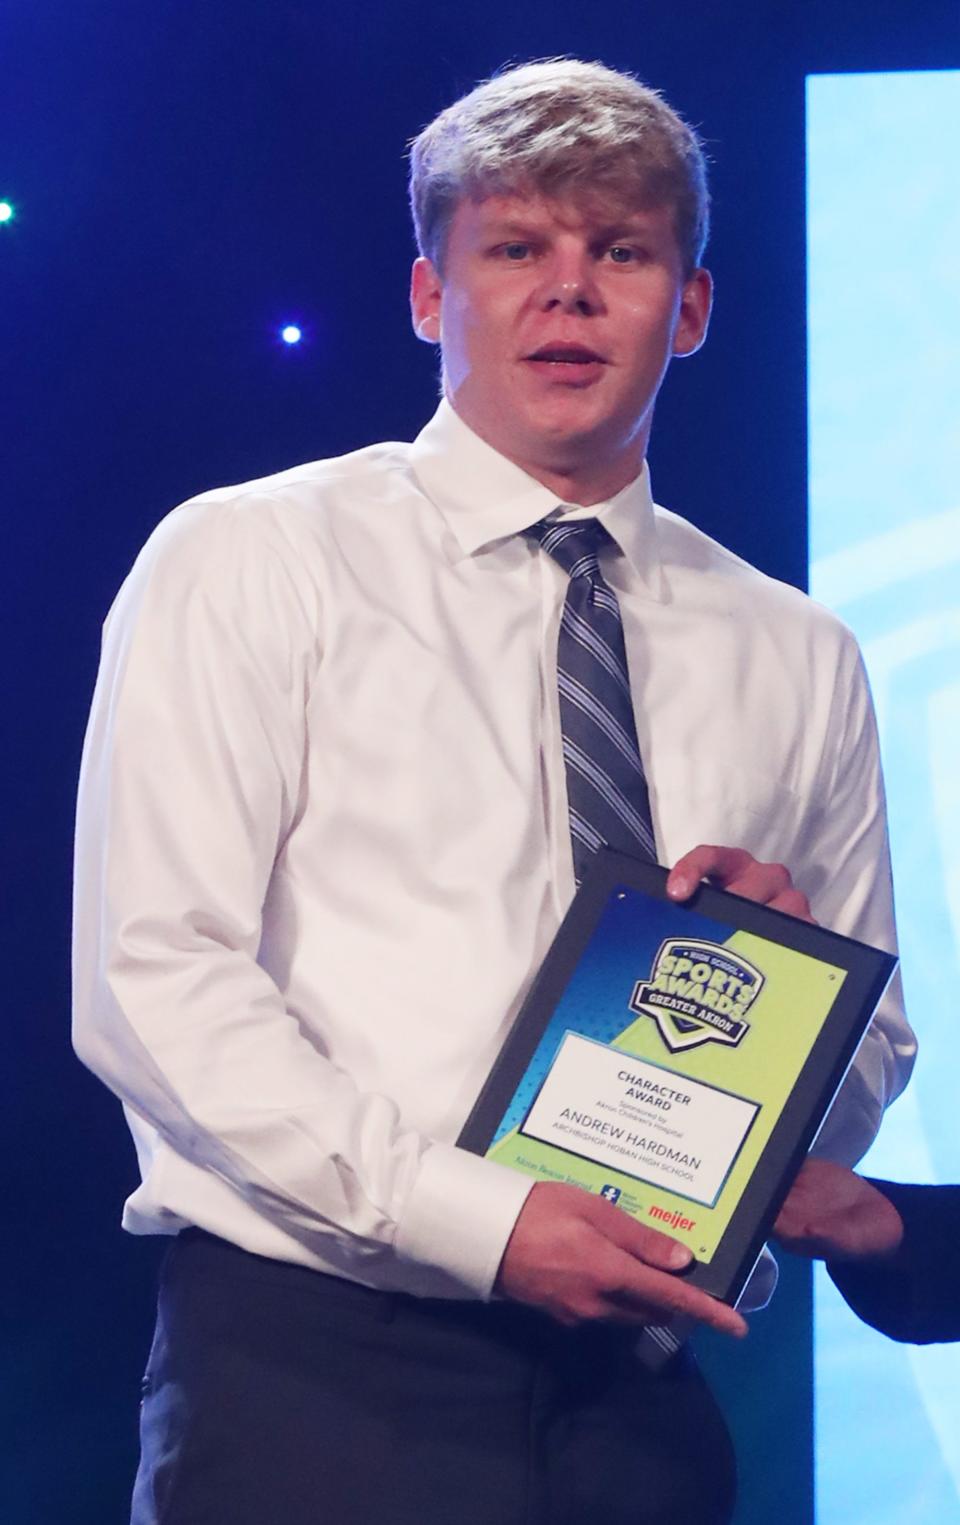 Archbishop Hoban High's Andrew Hardman Greater Akron Character Award recipient at the High School Sports All-Star Awards at the Civic Theatre in Akron on Friday.